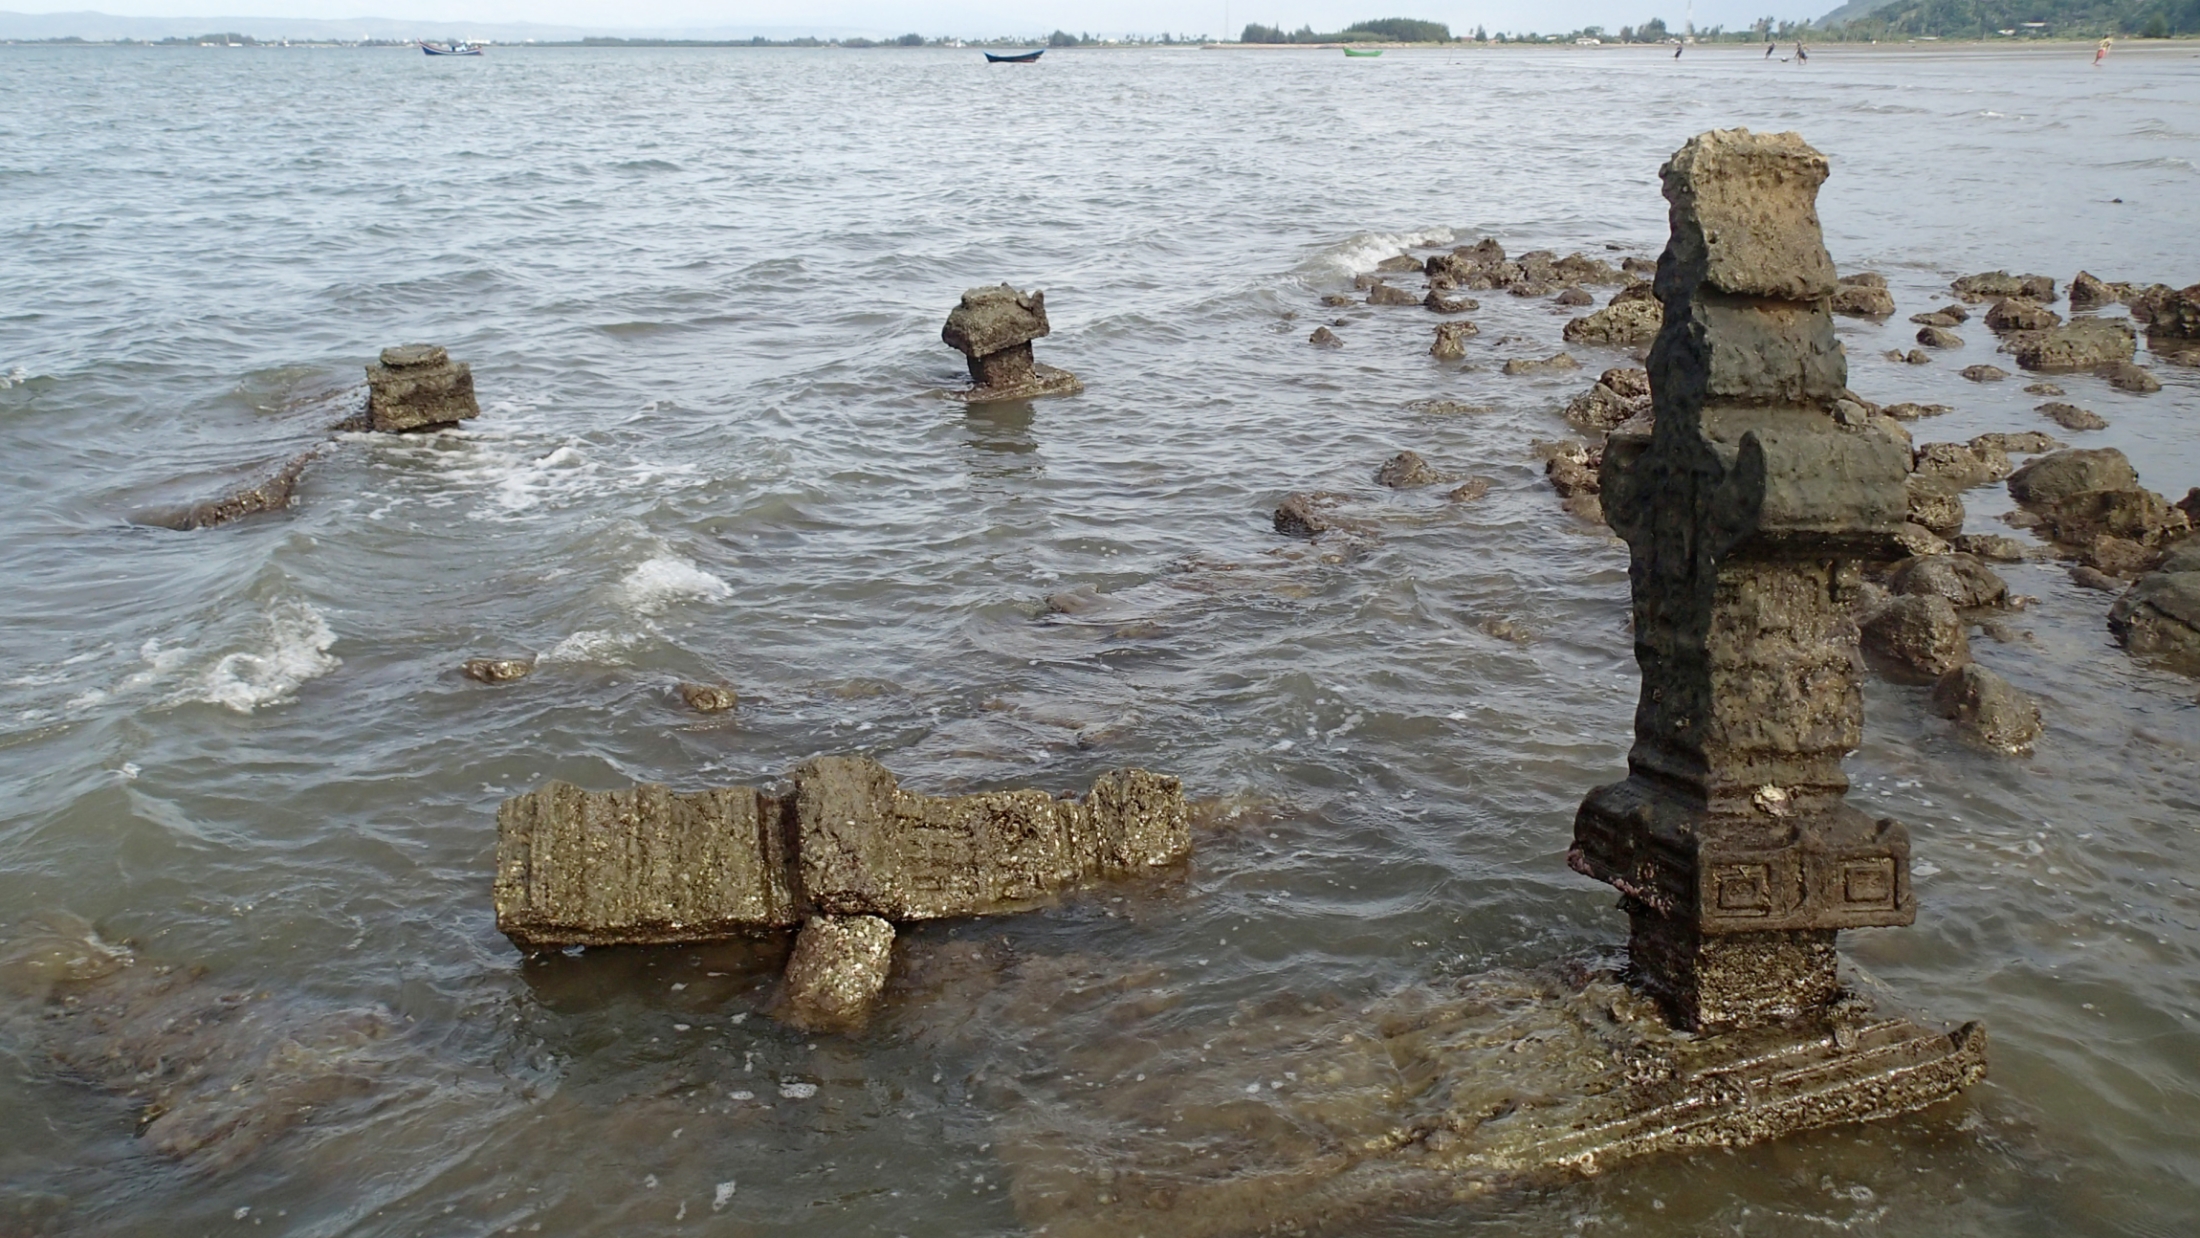 17th century gravestones now half submerged in the intertidal zone near Banda Aceh (Source: Patrick Daly/Earth Observatory of Singapore)